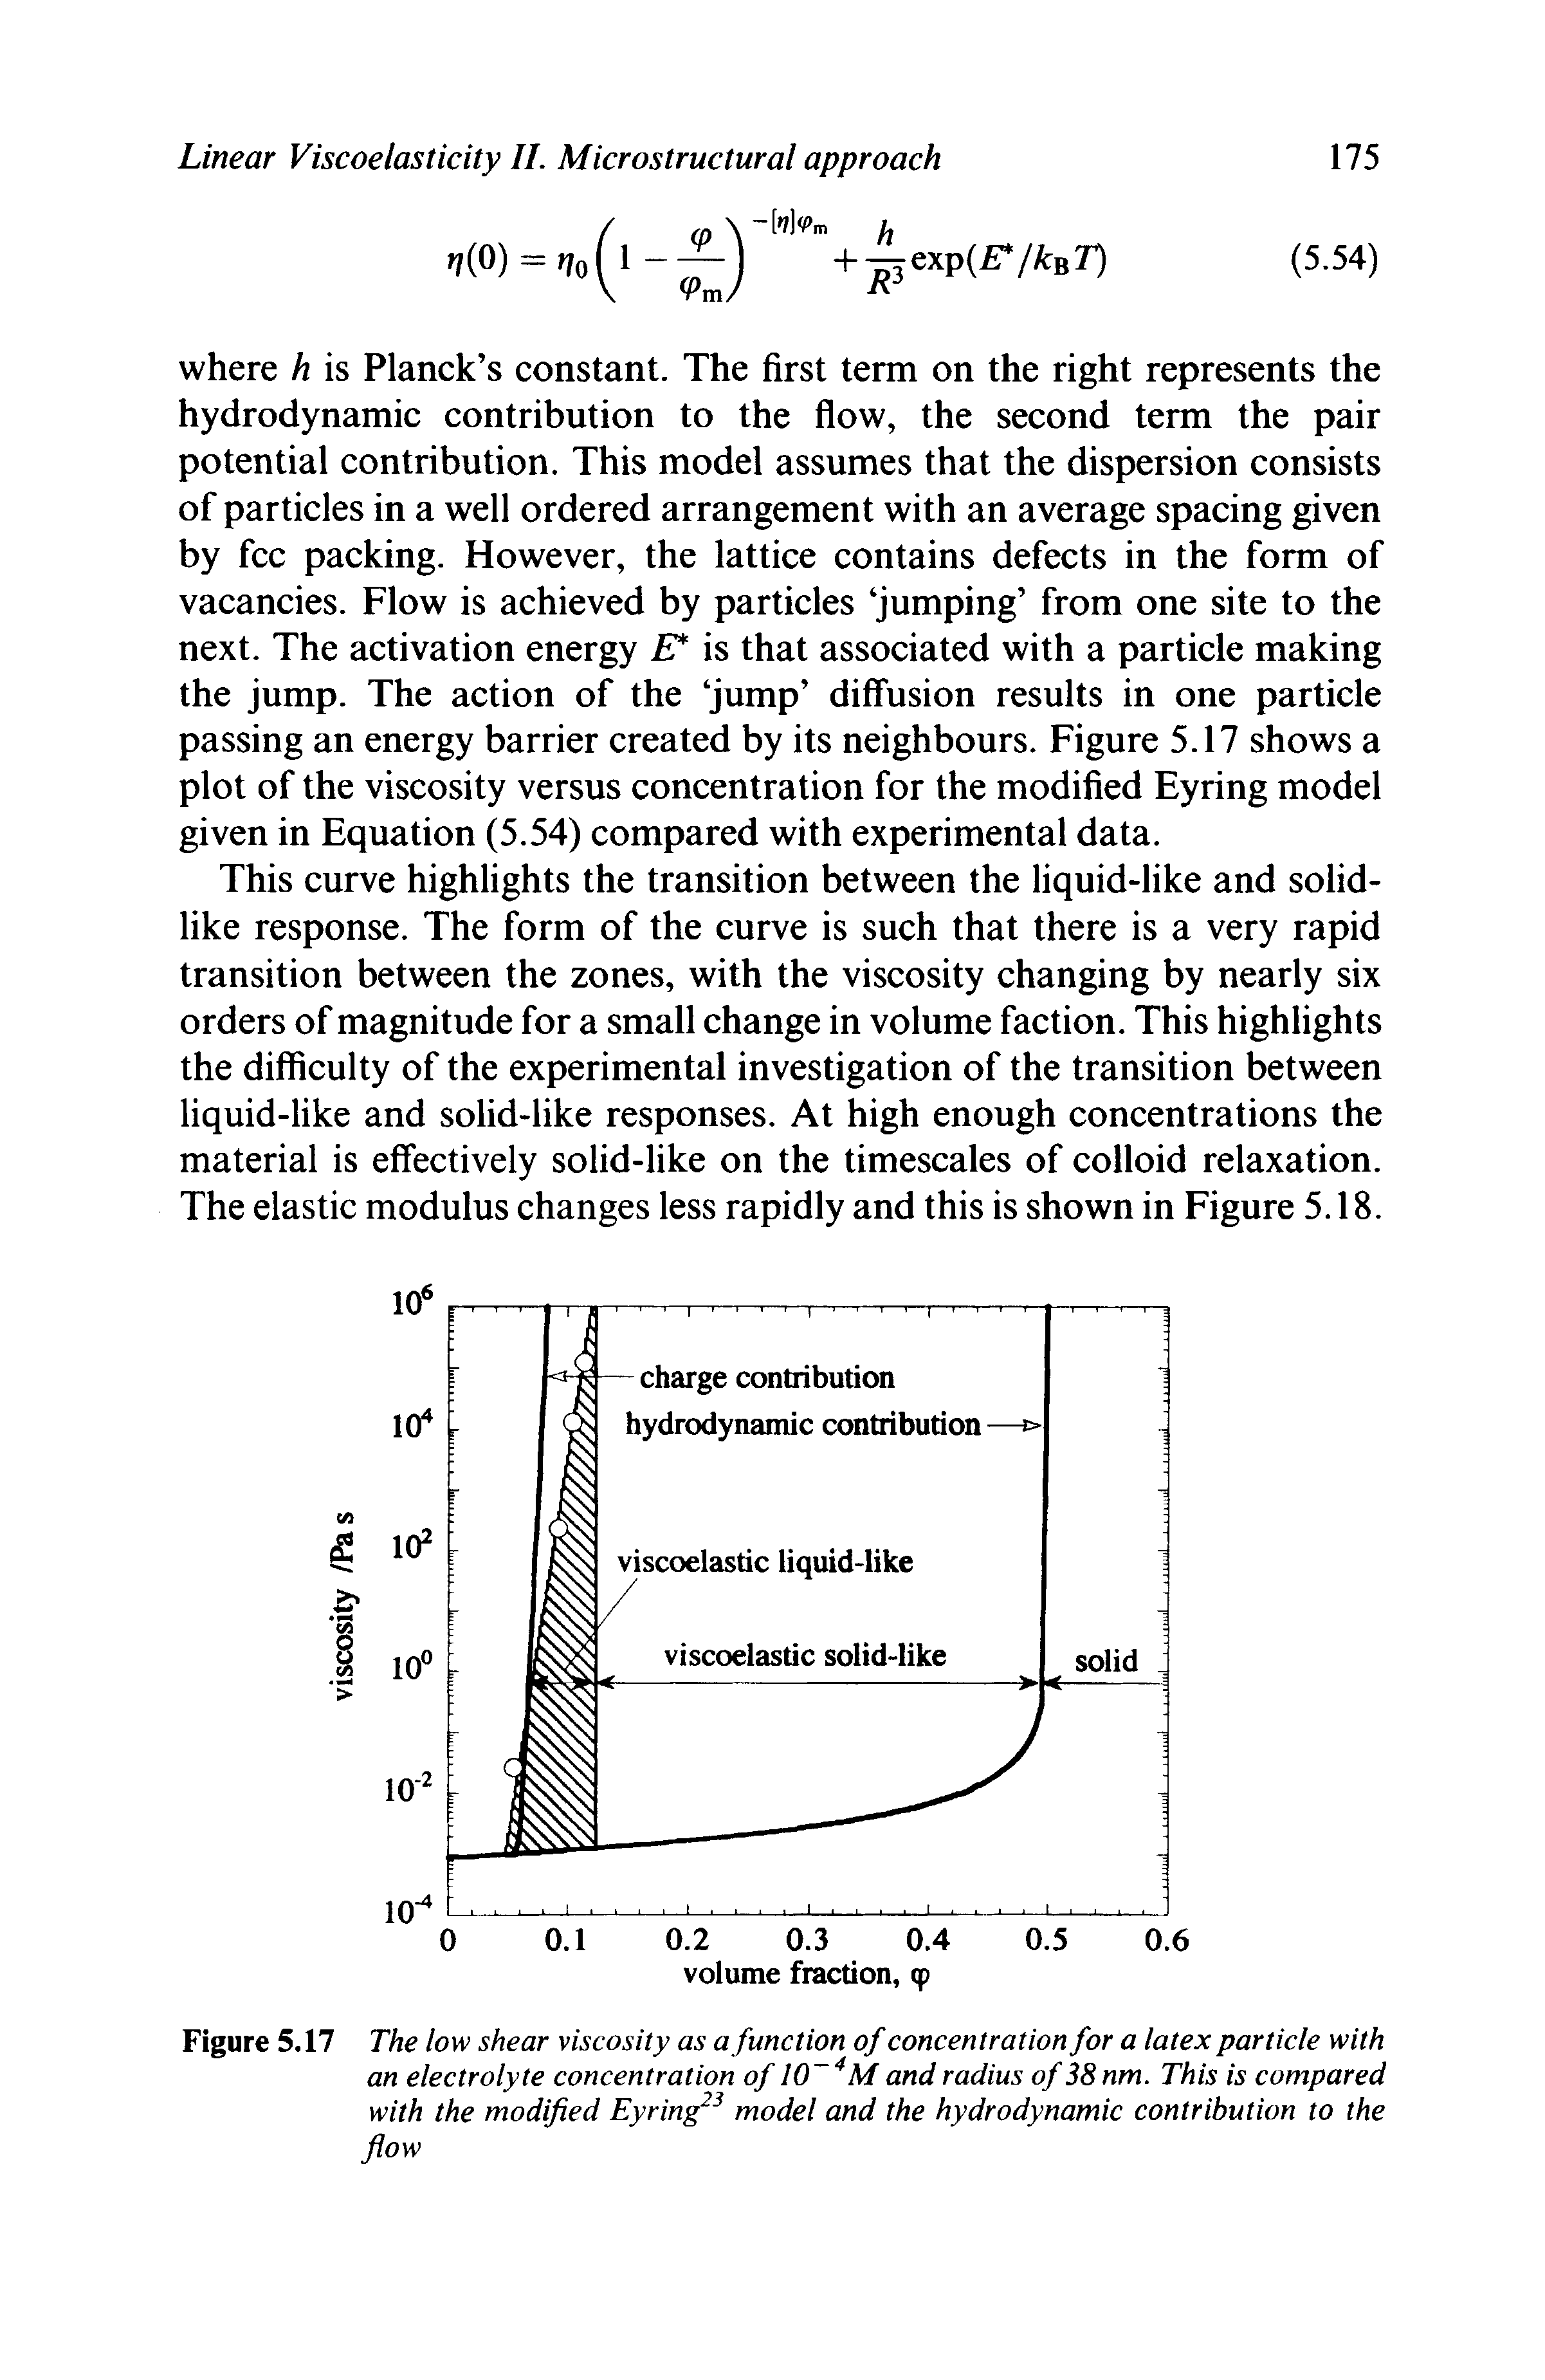 Figure 5.17 The low shear viscosity as a function of concentration for a latex particle with an electrolyte concentration of 10 4M and radius of 38 nm. This is compared with the modified Eyring23 model and the hydrodynamic contribution to the flow...